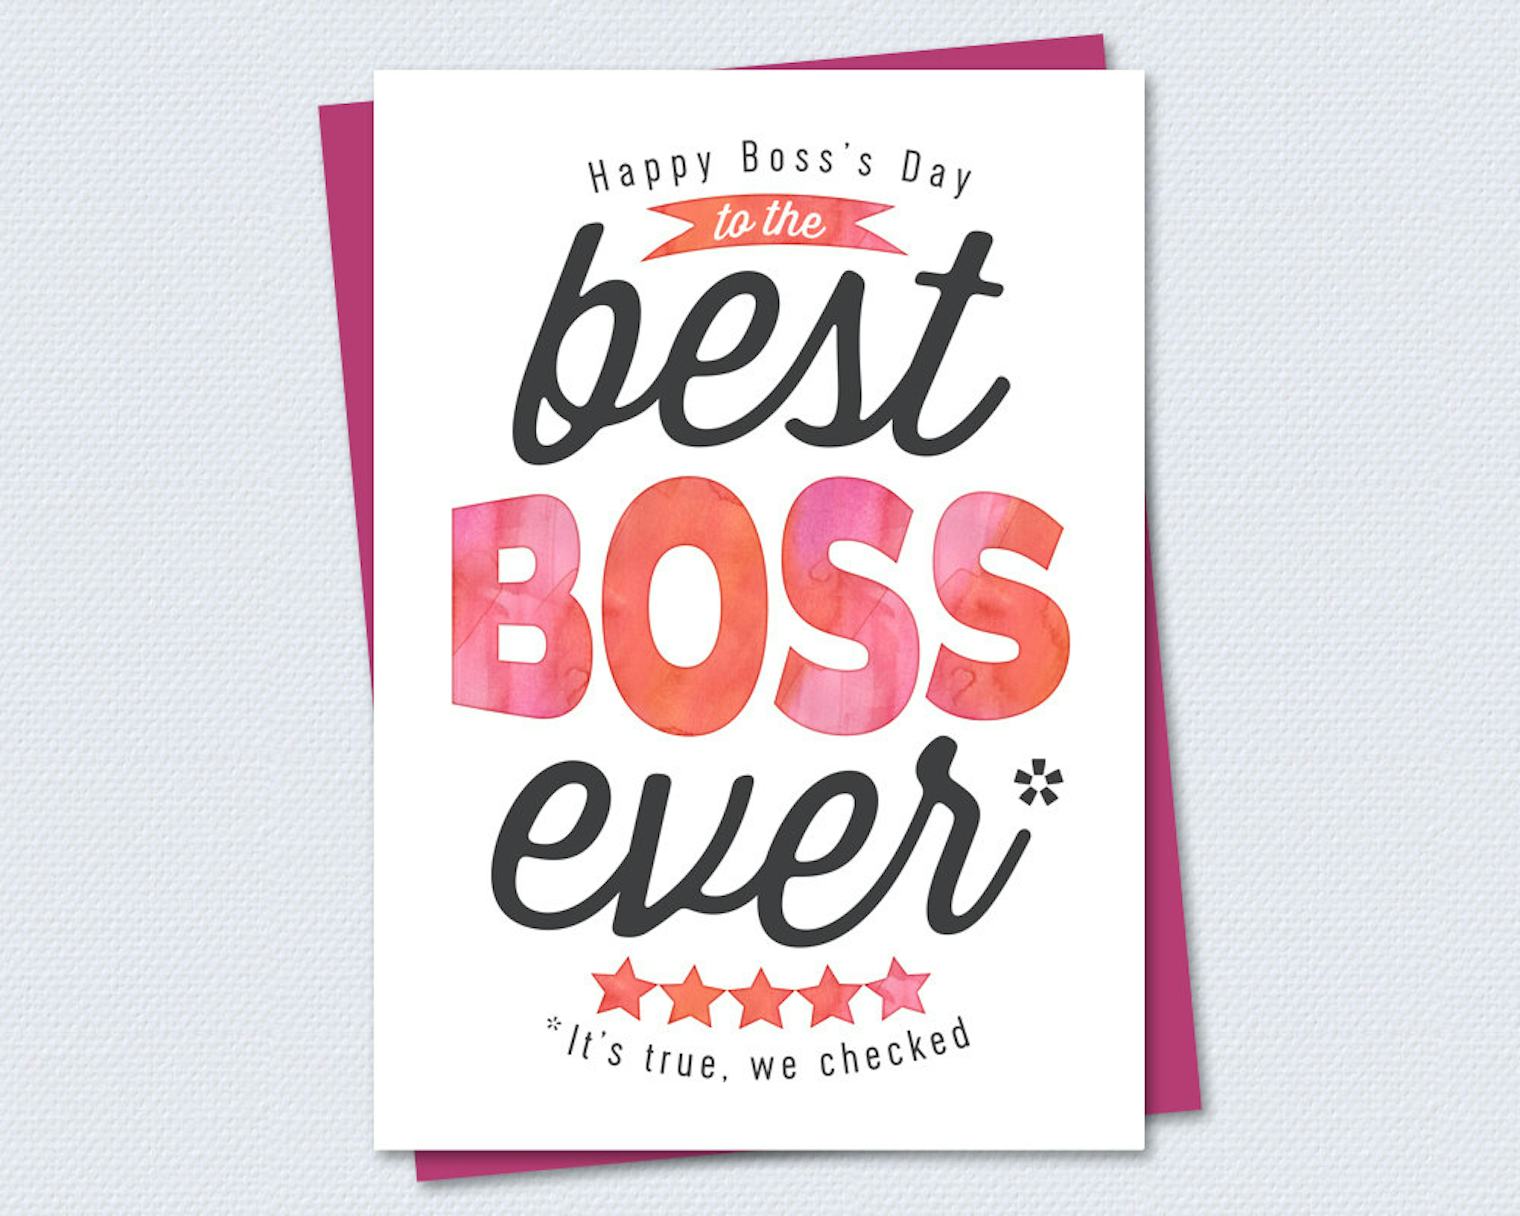 National Boss' Day Is Here! 20 Funny Cards And Gifts For Your Boss That